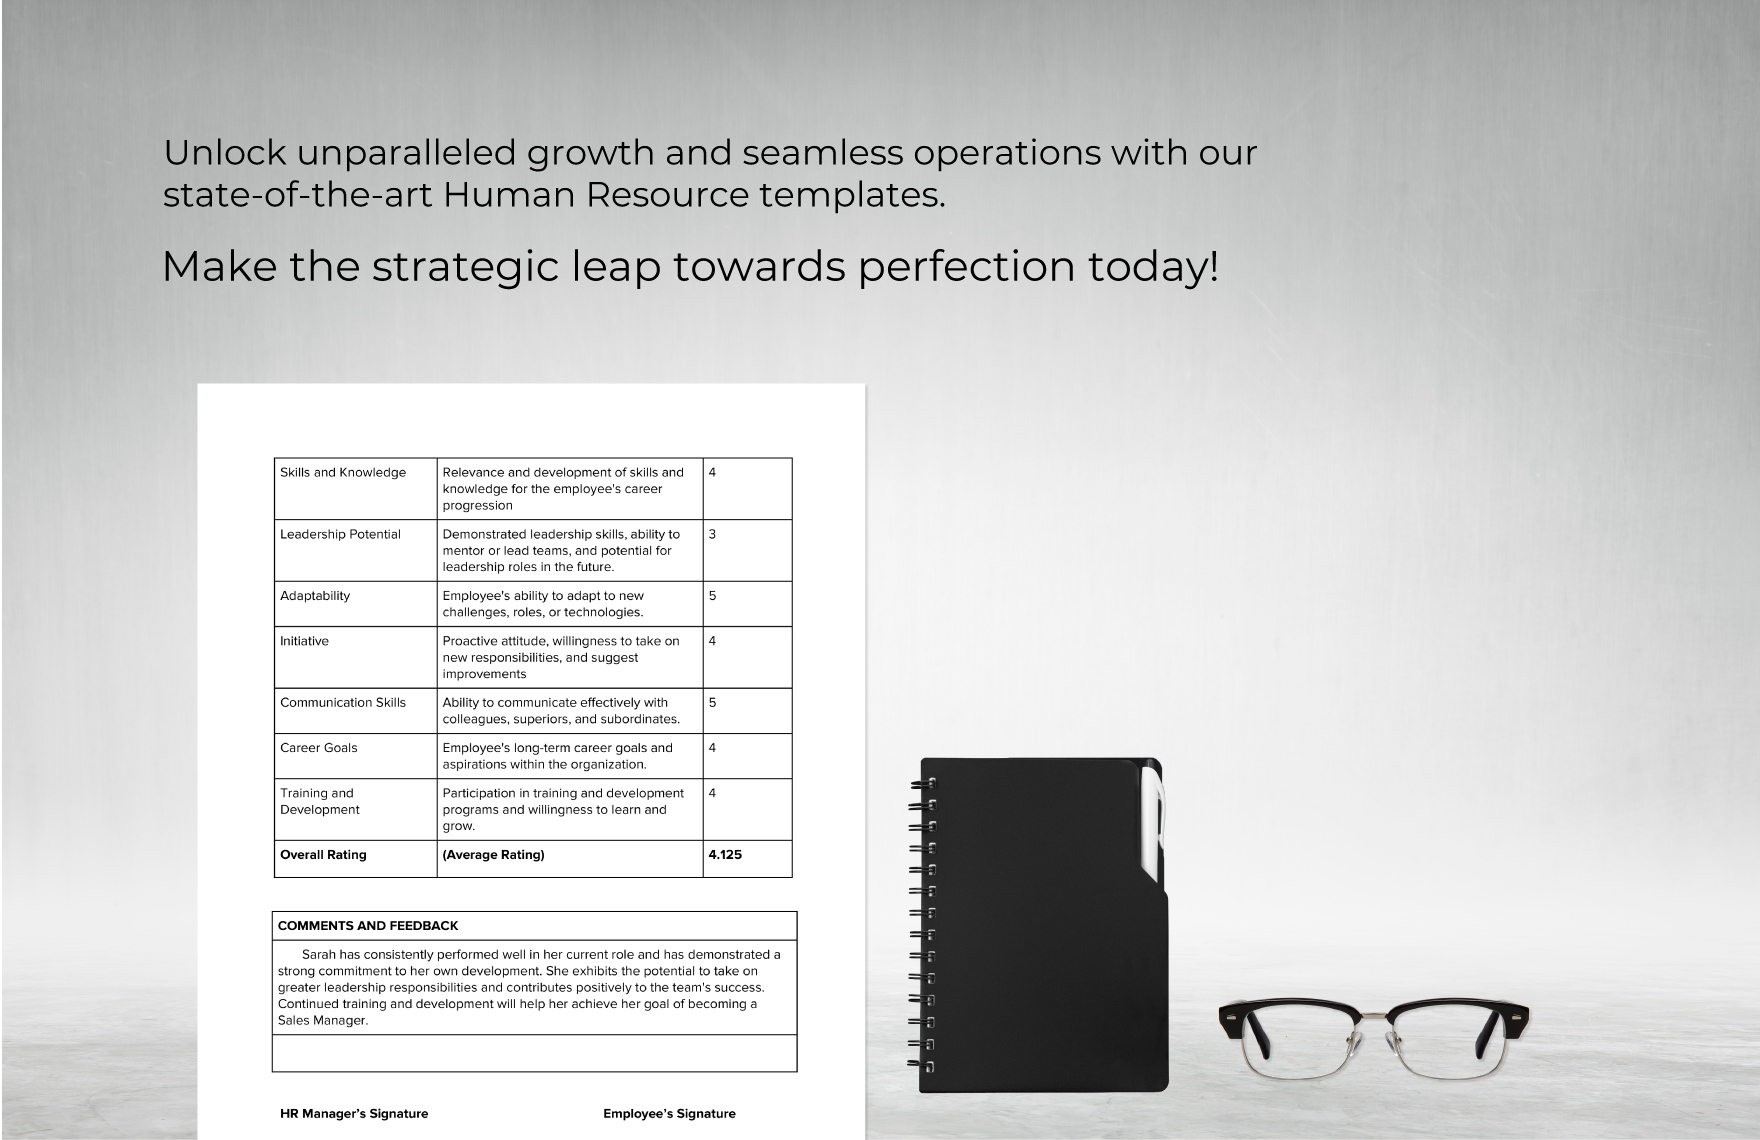 Growth Opportunities Evaluation HR Template